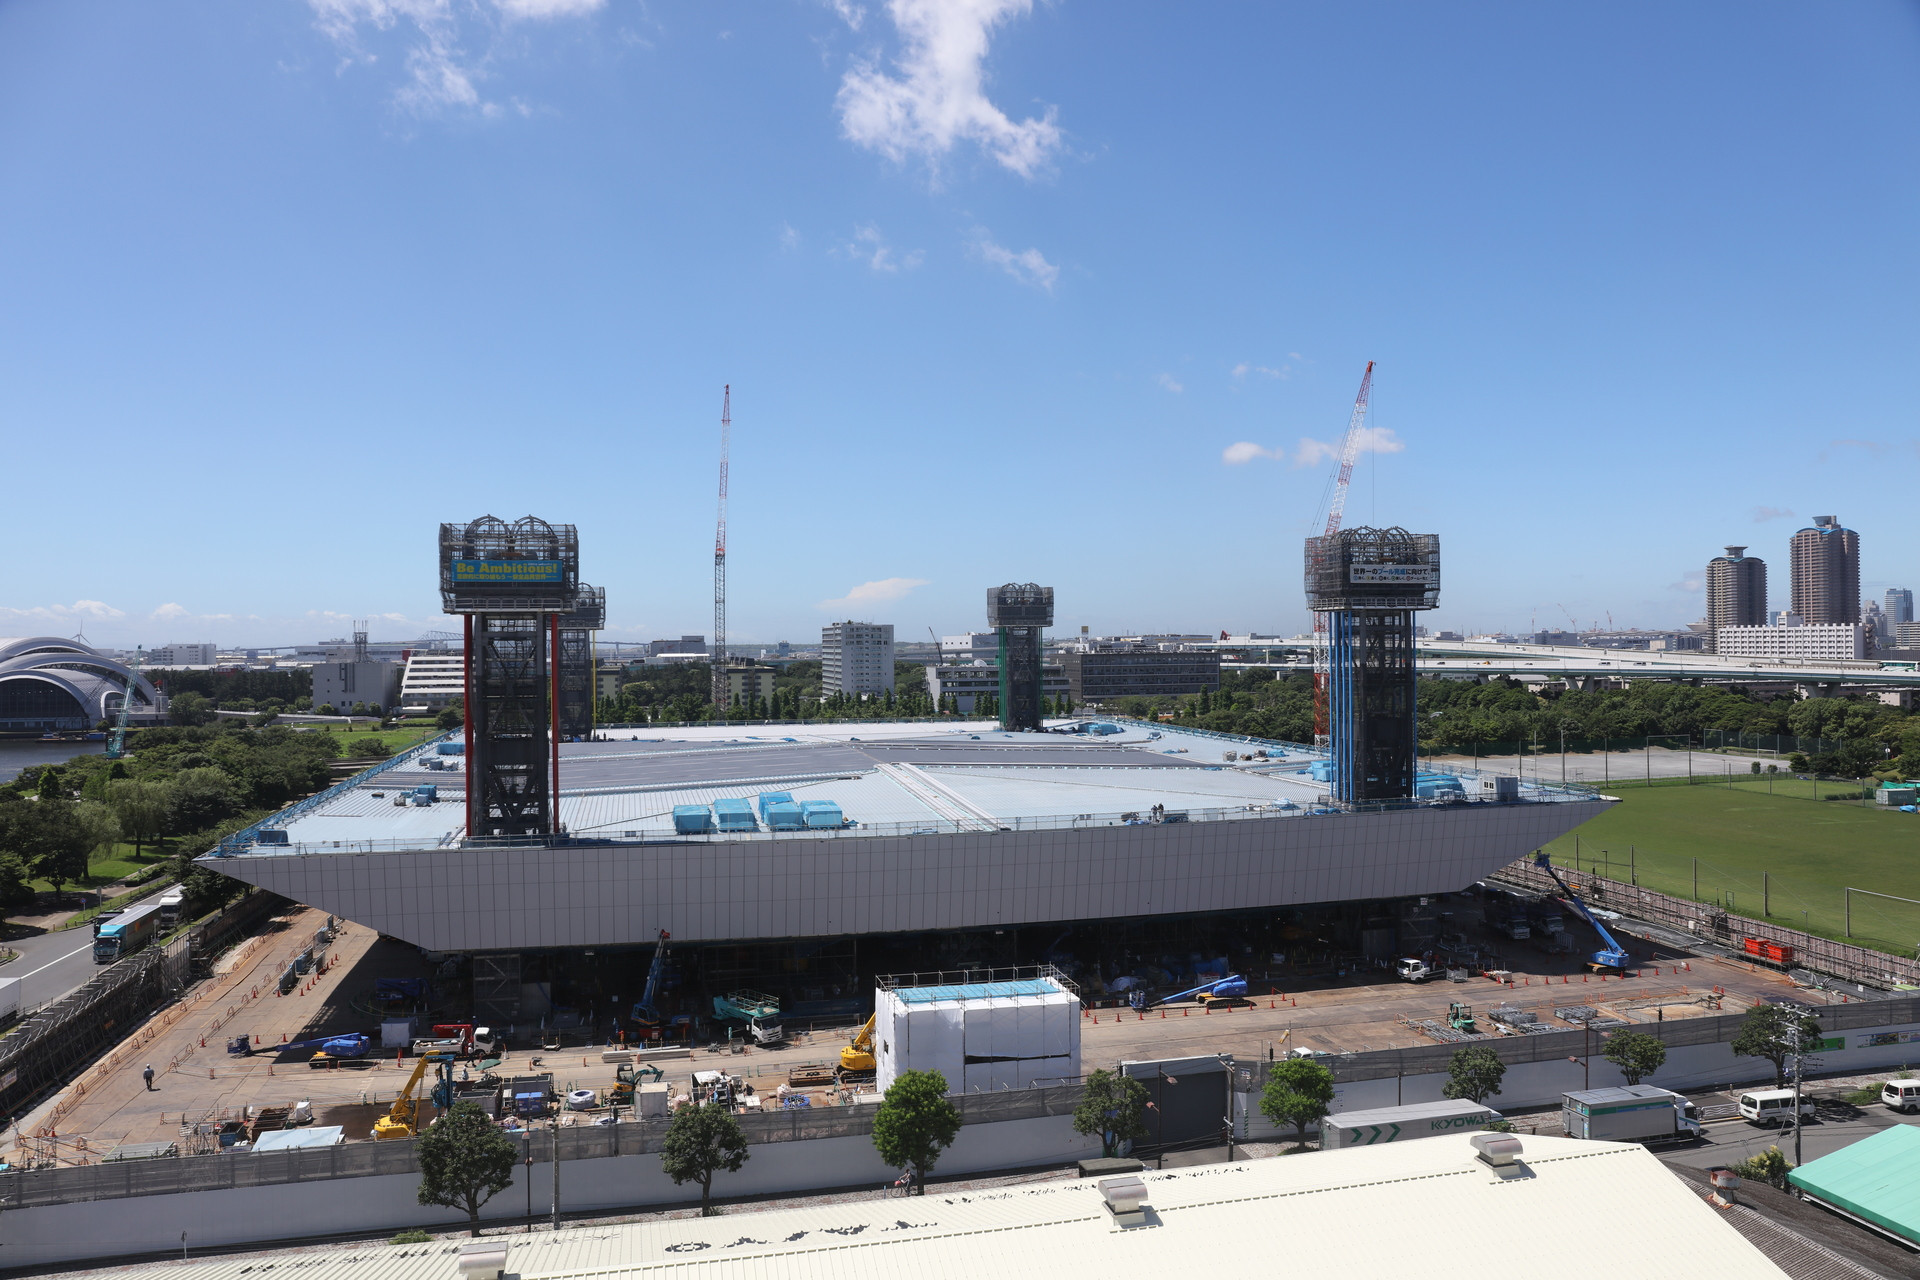 The Olympic Aquatic Centre is expected to be the final permanent venue to be finished, with construction expected to end in February 2020 ©Tokyo 2020